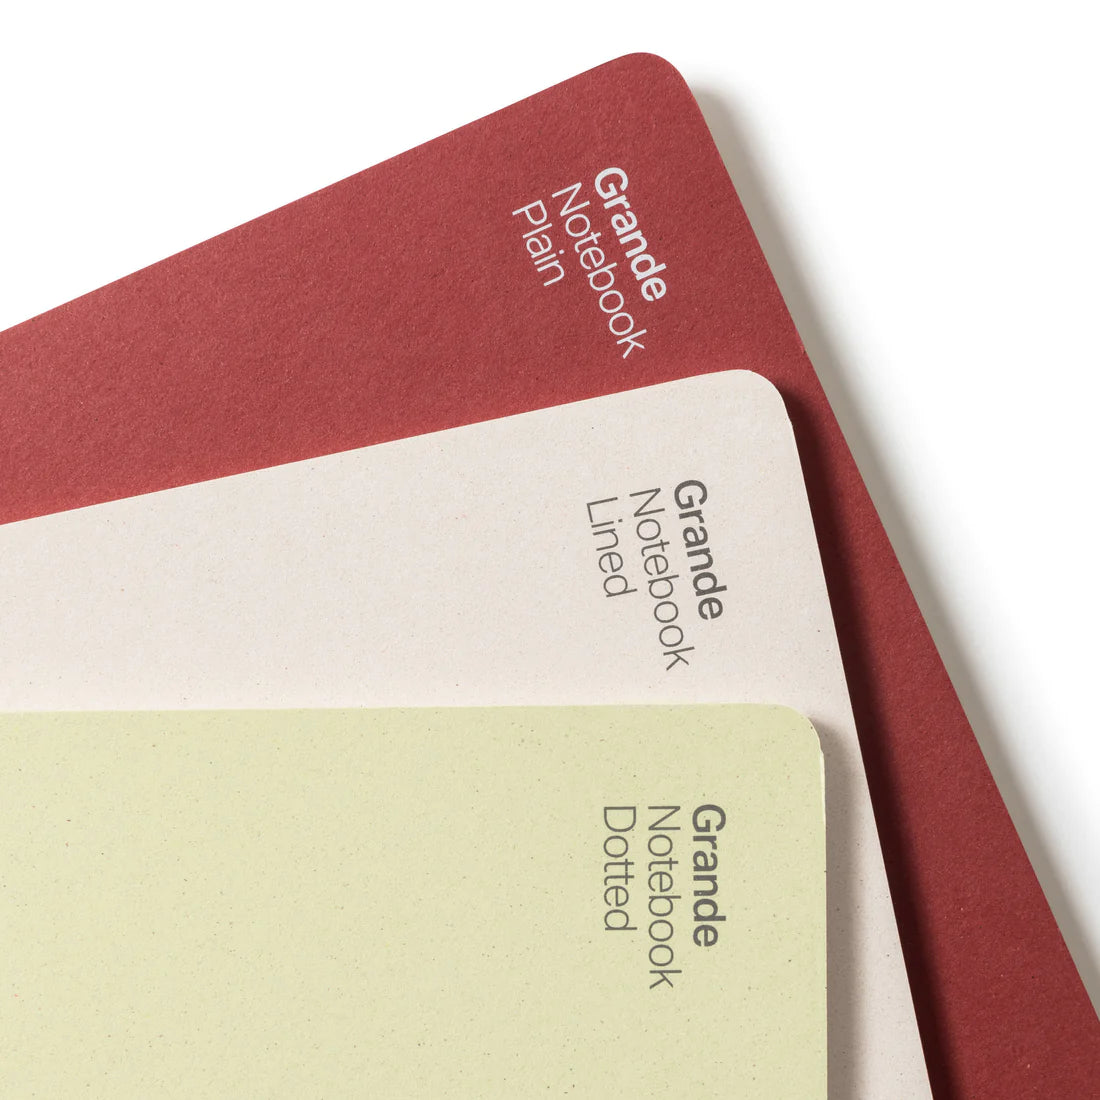 Detail of thee notebooks (one red, one white, one yellow) placed on top of each other in front of white background.